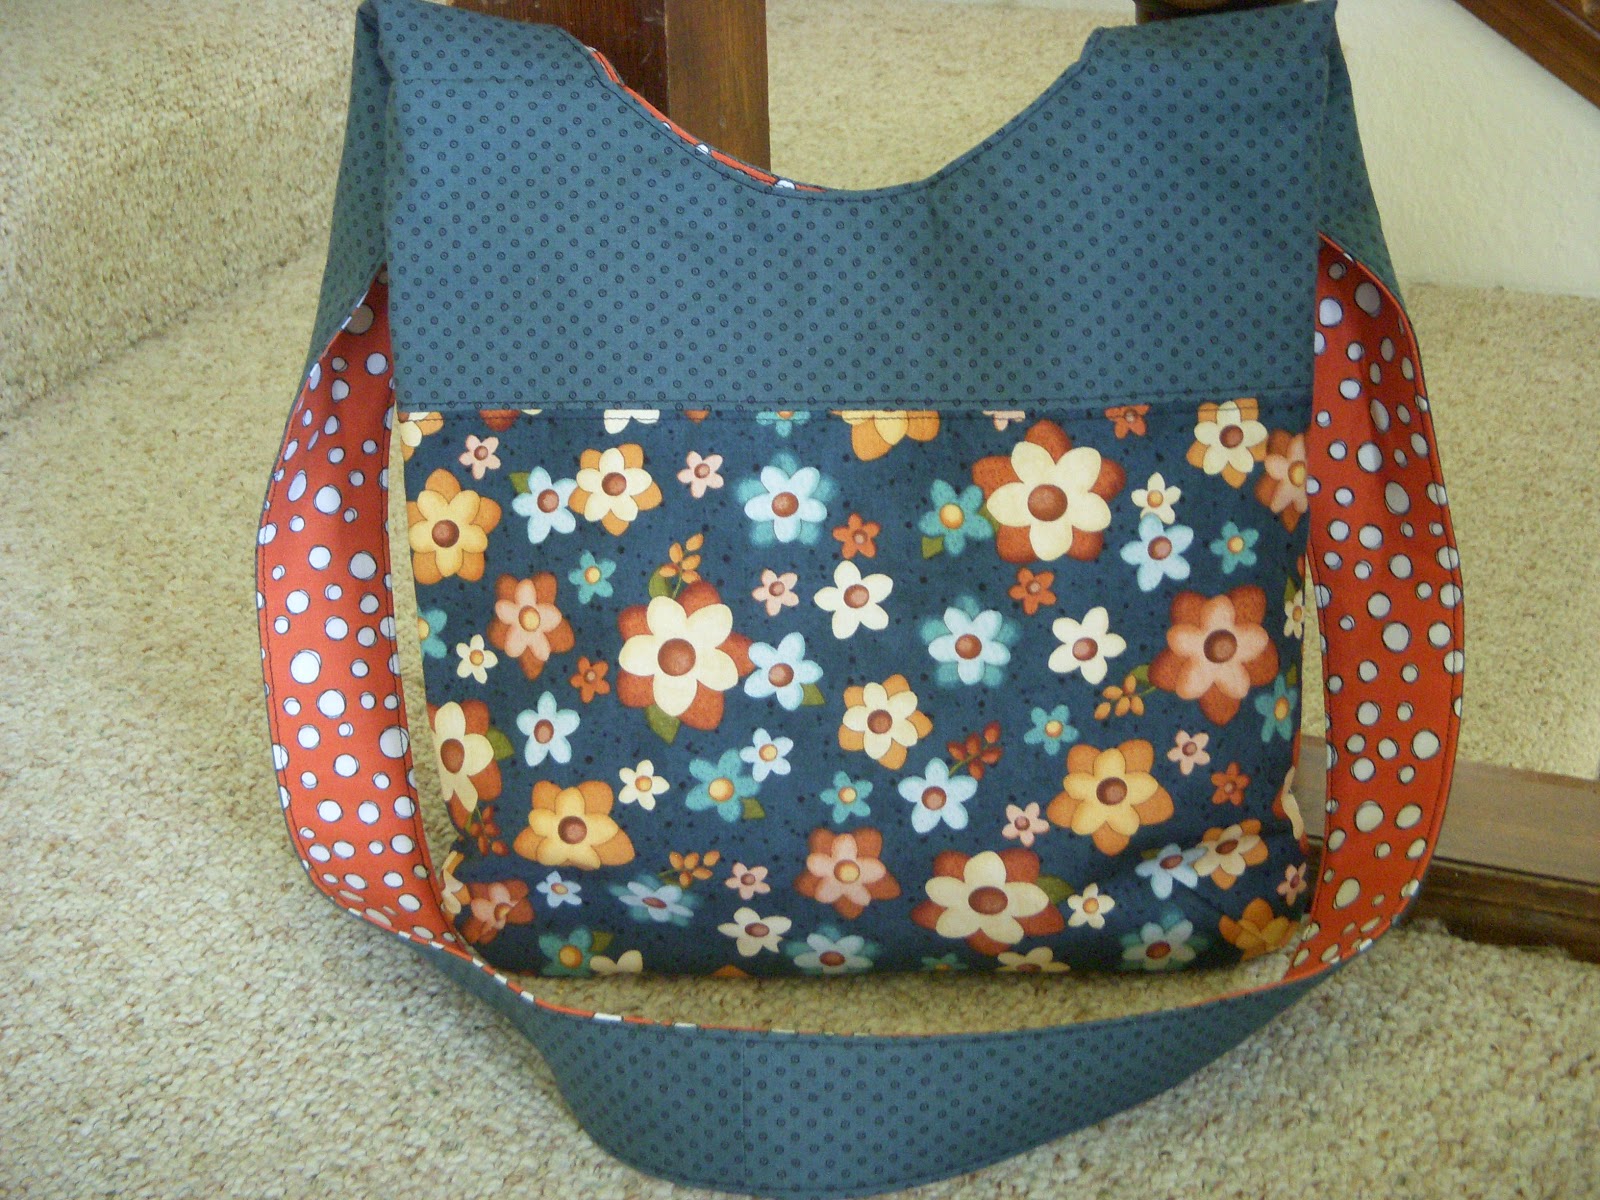 Crafted by KatieB: Sling Bag